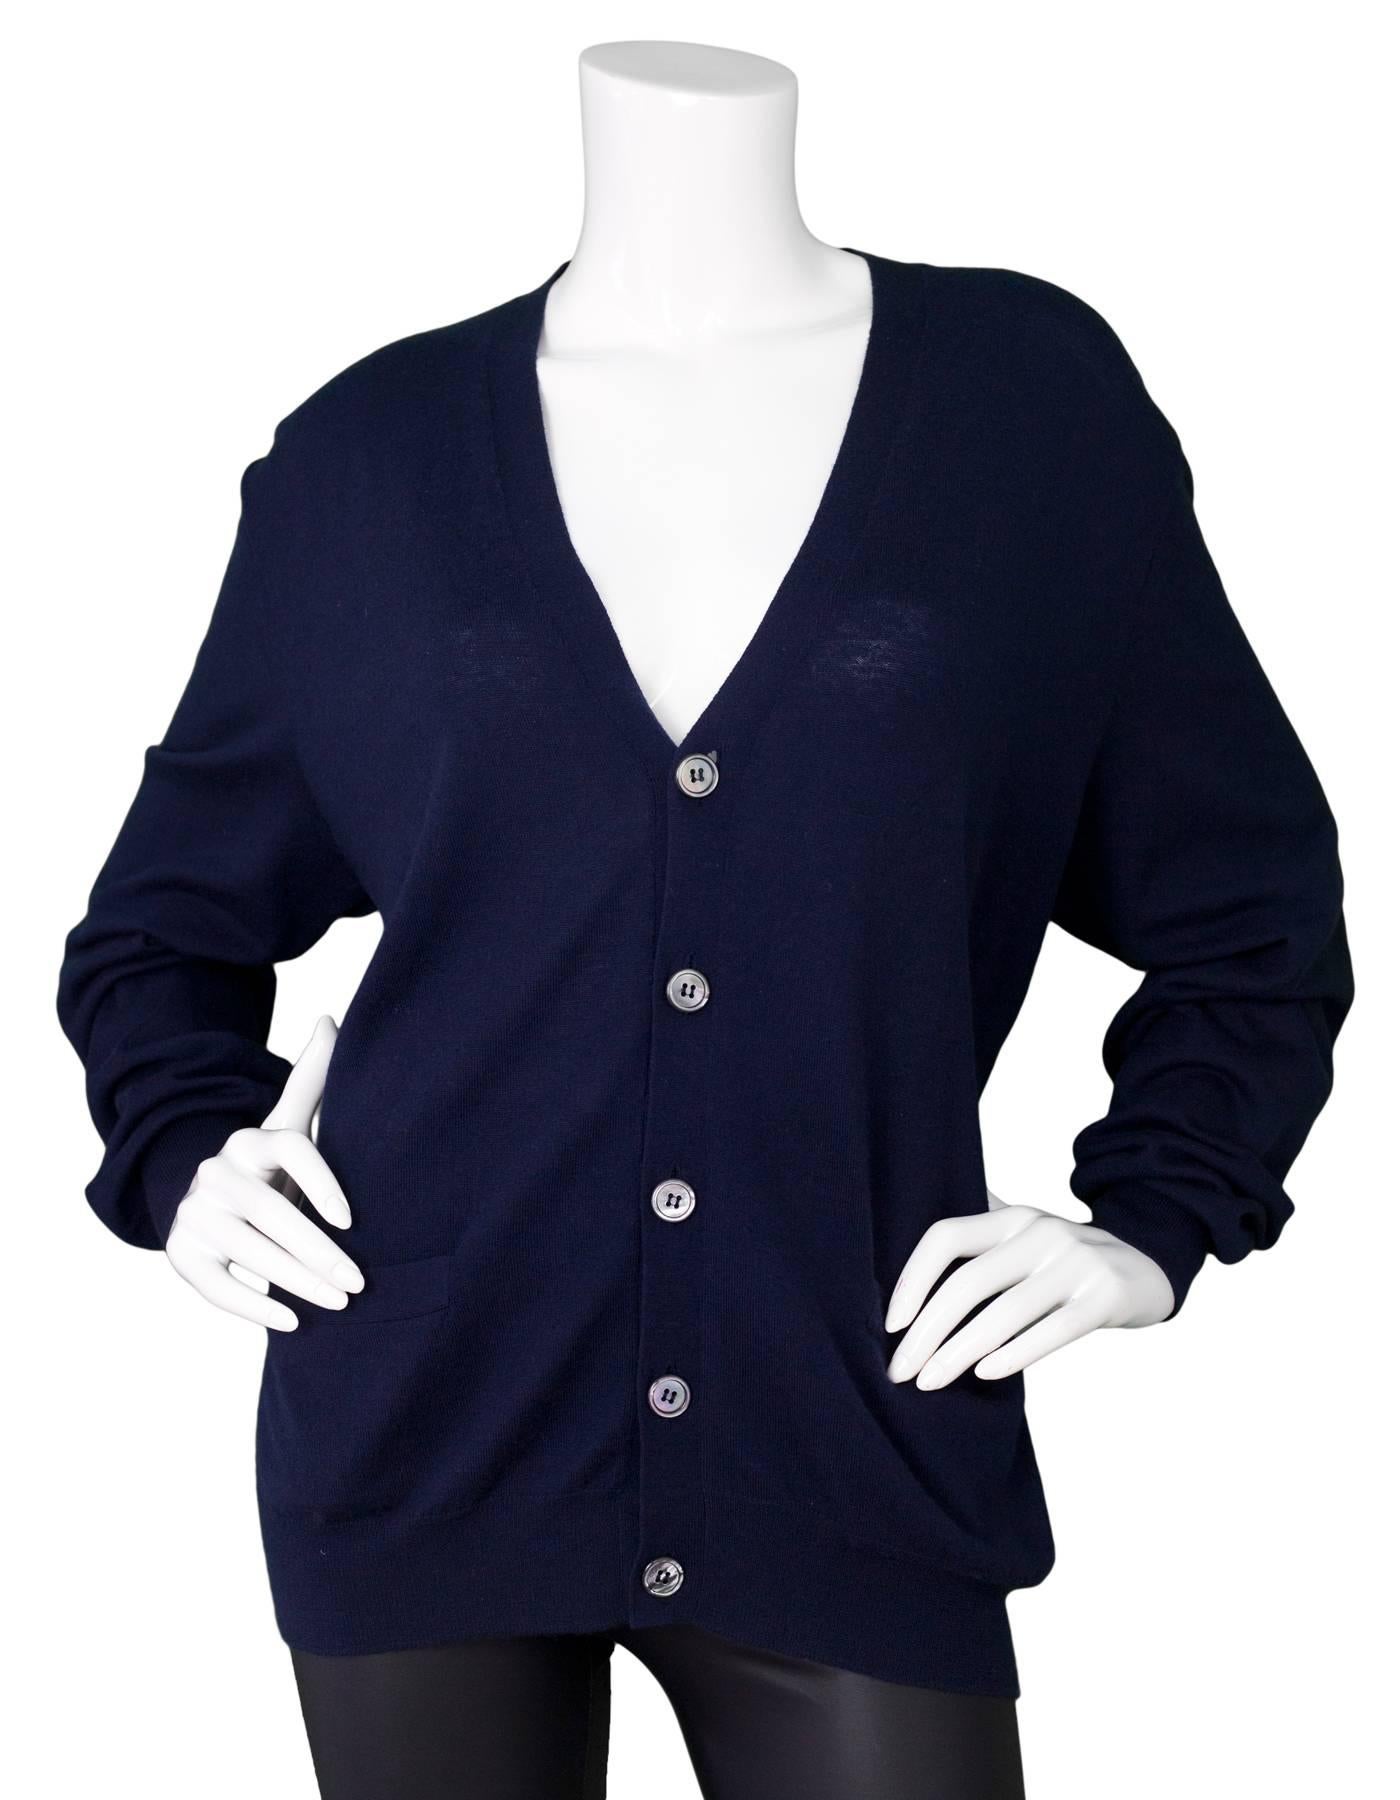 Ralph Lauren Purple Label Navy Cashmere Cardigan Sz XL

Made In: Italy
Color: Navy
Composition: 100% Cashmere
Lining: None
Closure/Opening: Front button closure
Exterior Pockets: Slit pockets
Overall Condition: Excellent pre-owned condition with the